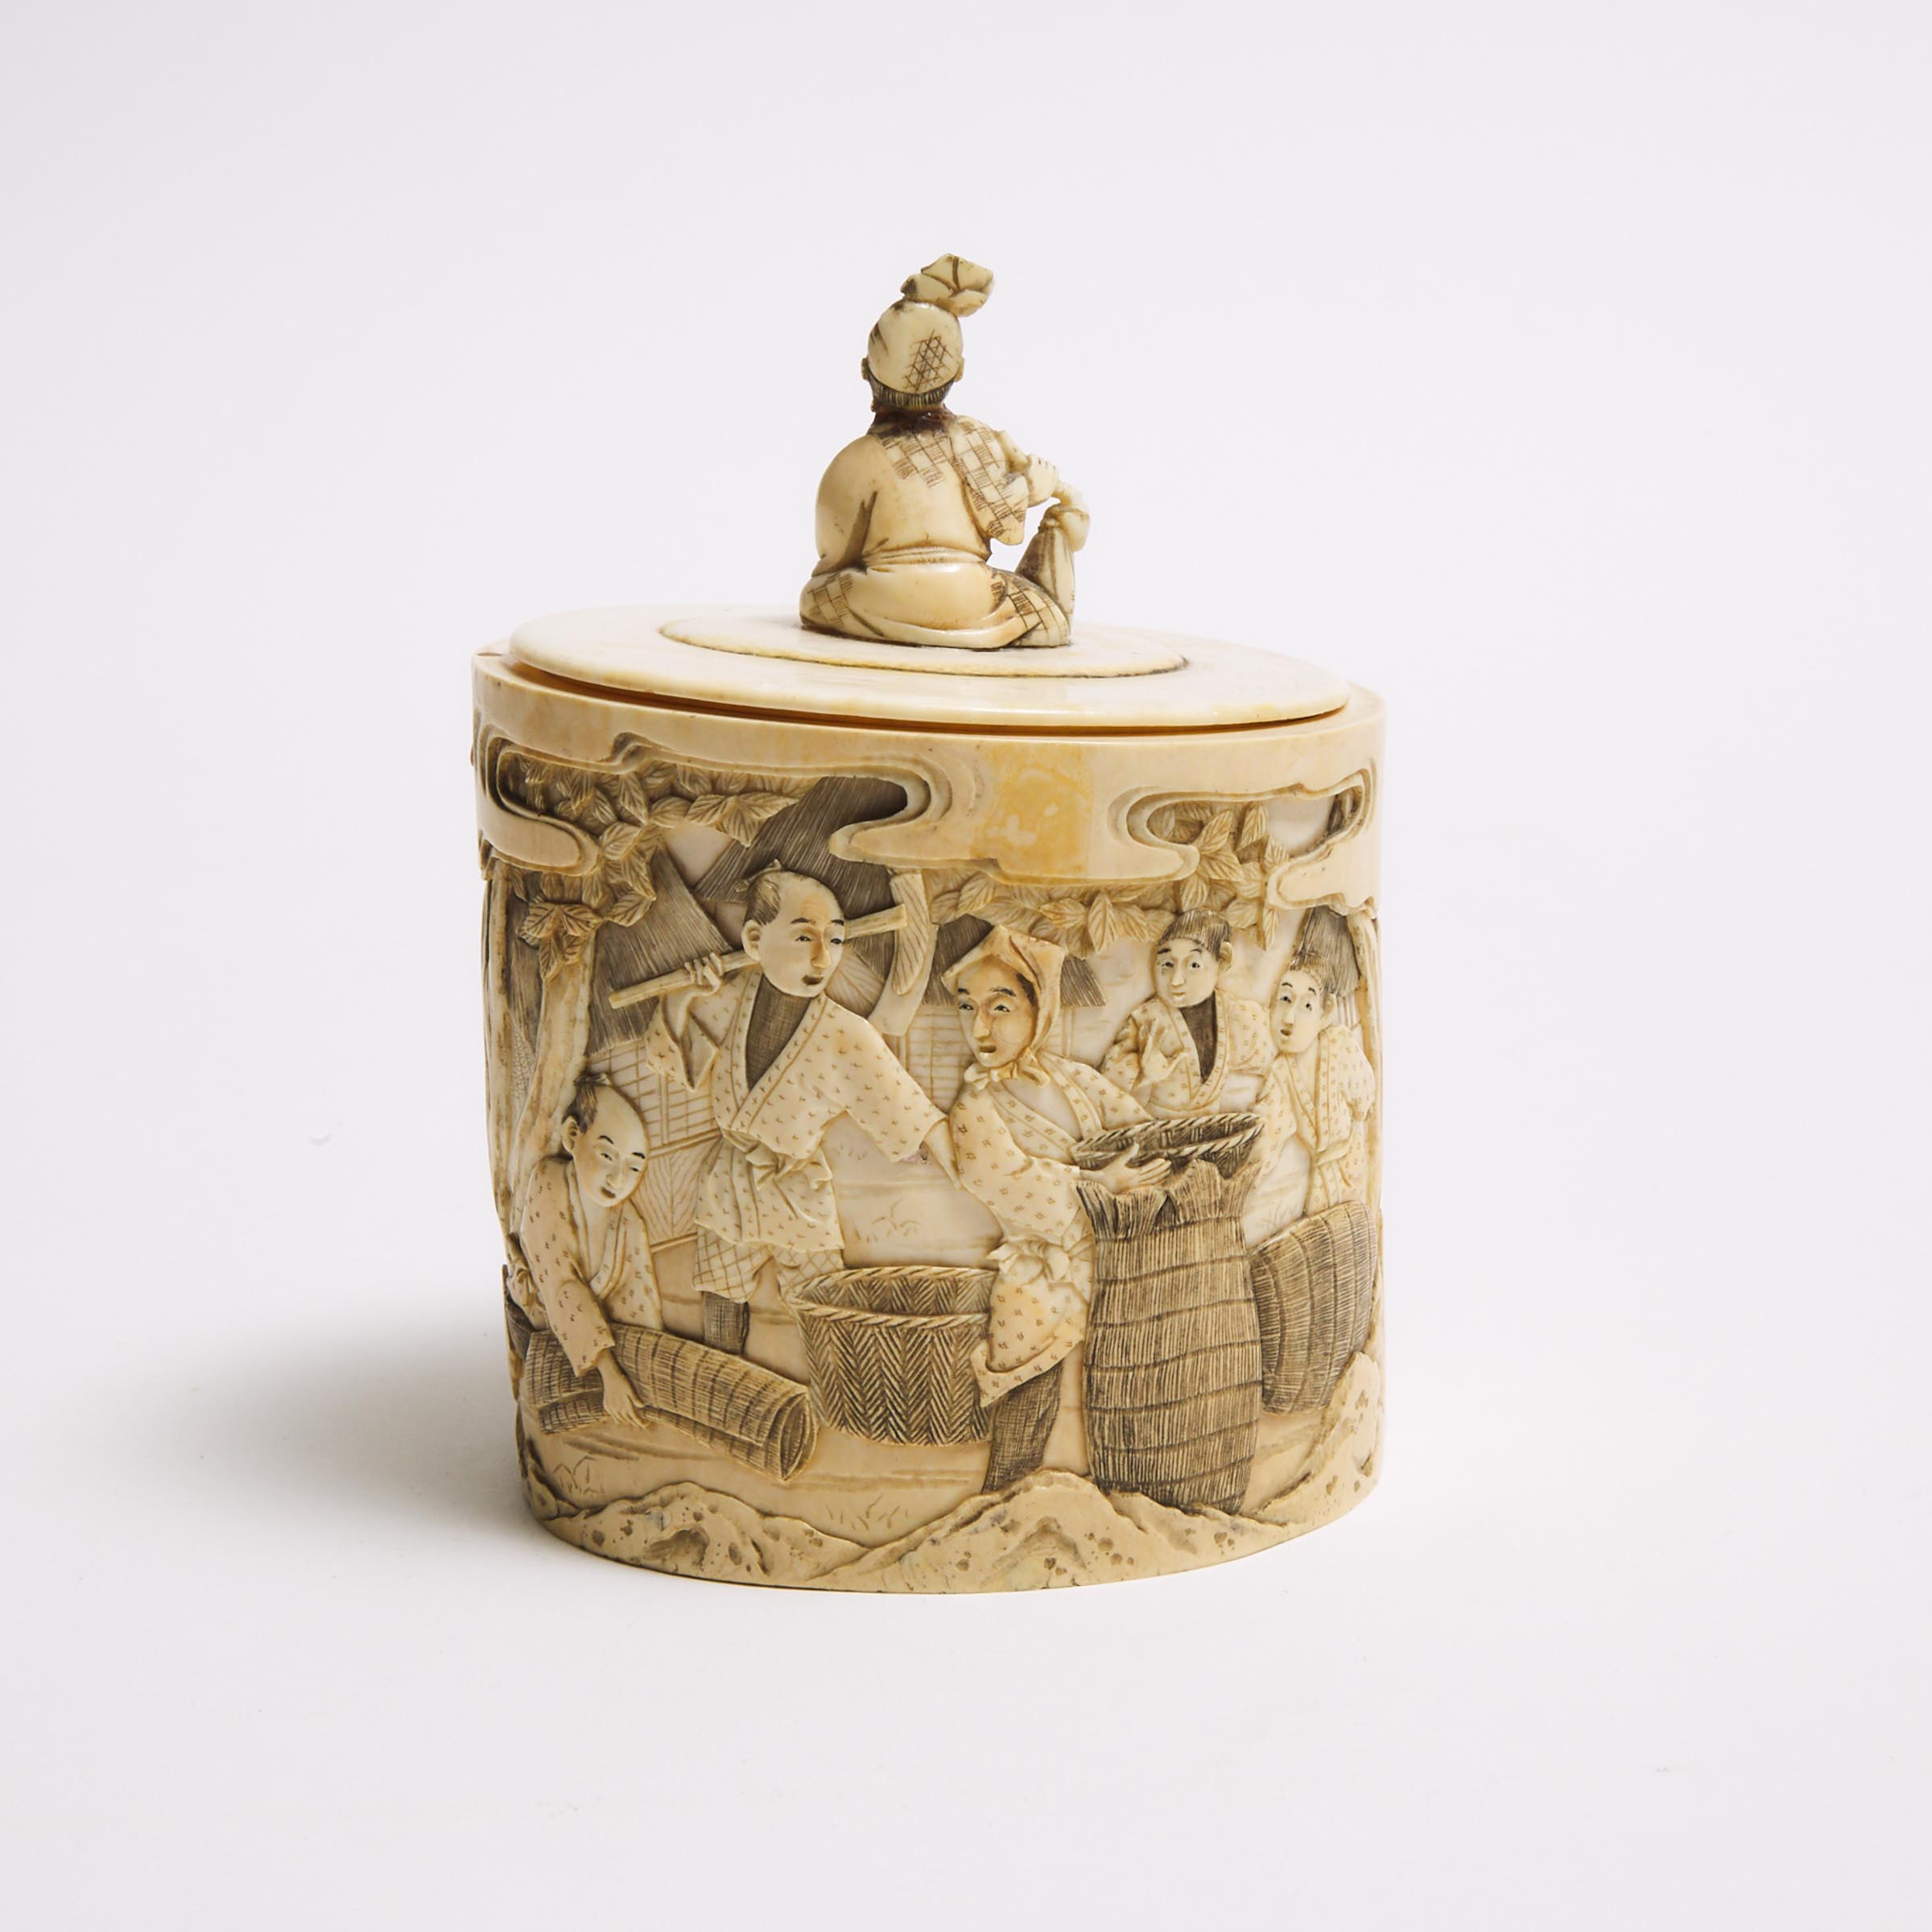 A Japanese Ivory Box and Cover, Meiji Period